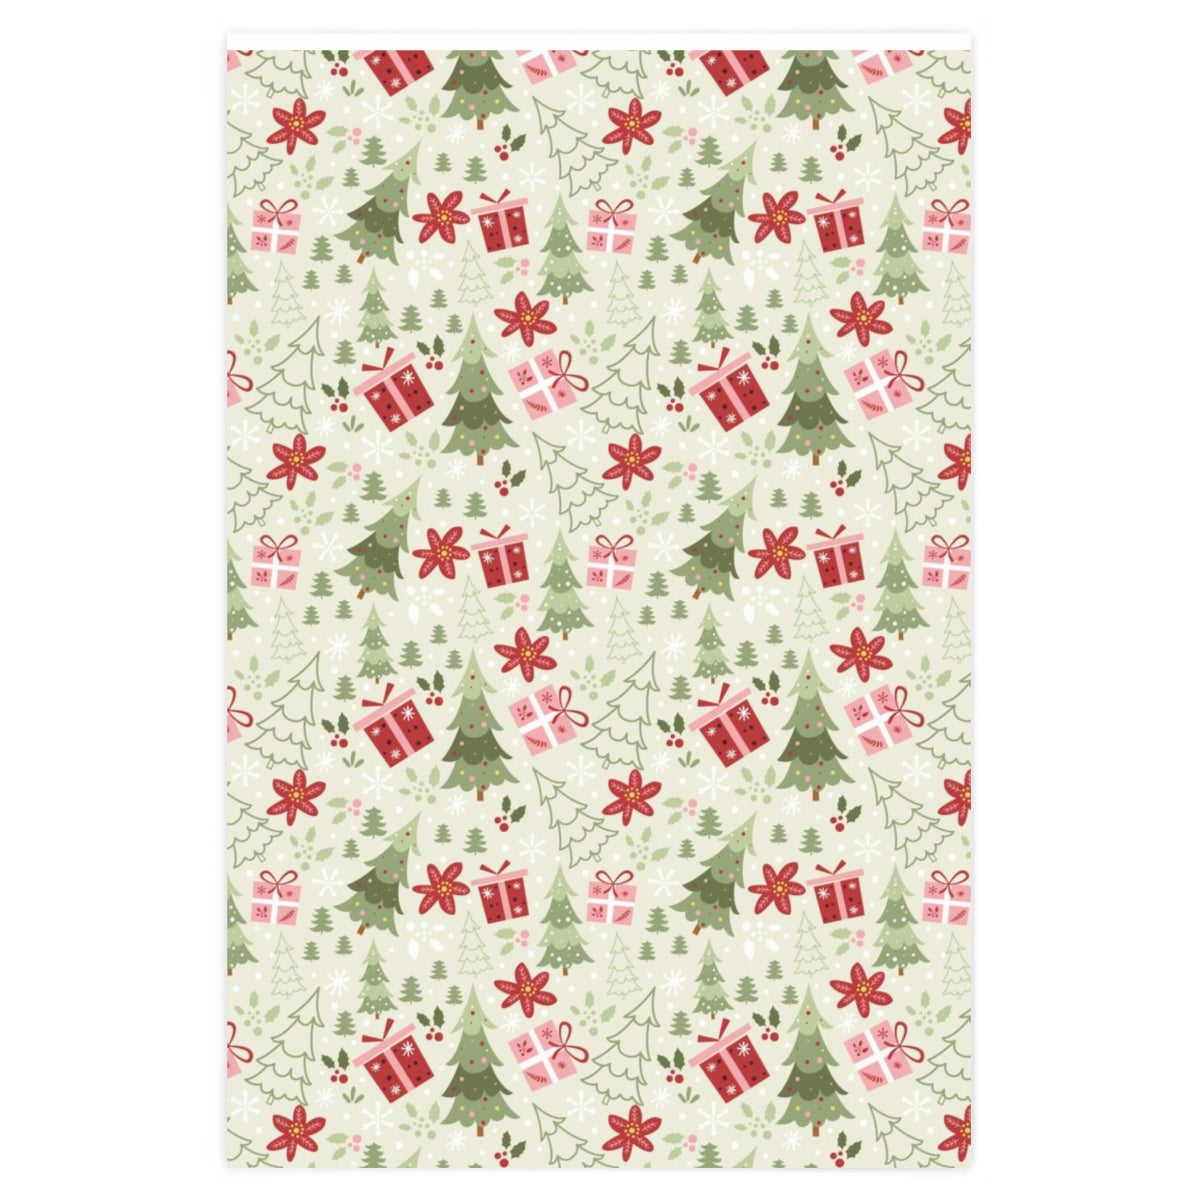 Vintage Christmas Wrapping Paper, Green Pine Trees Print Art